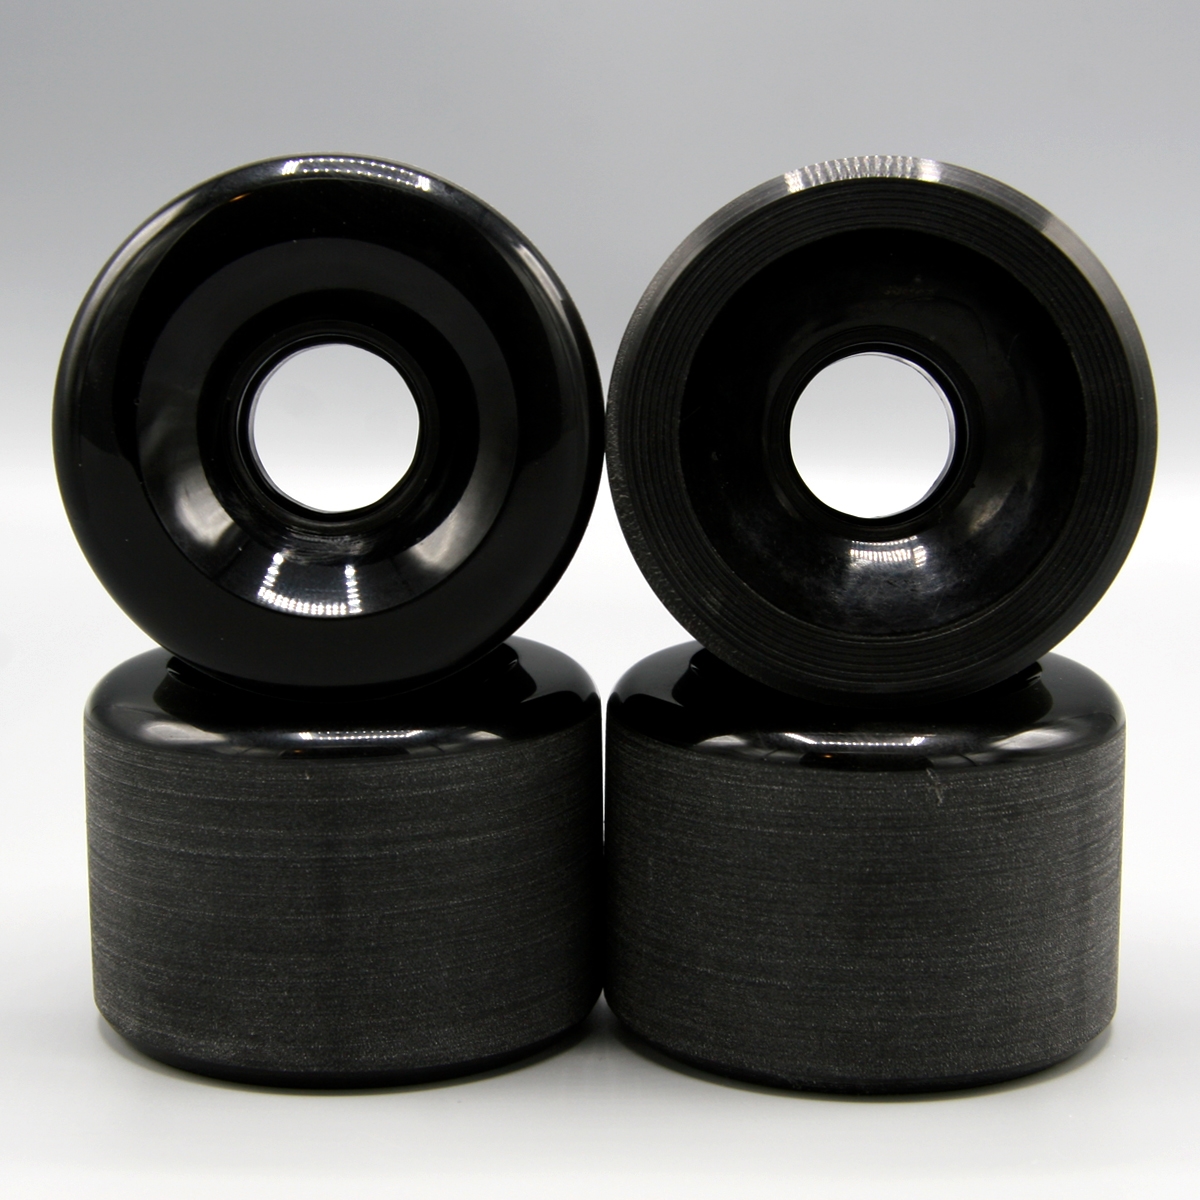 Blank 65mm (Solid Black) - Includes 1/4" Risers